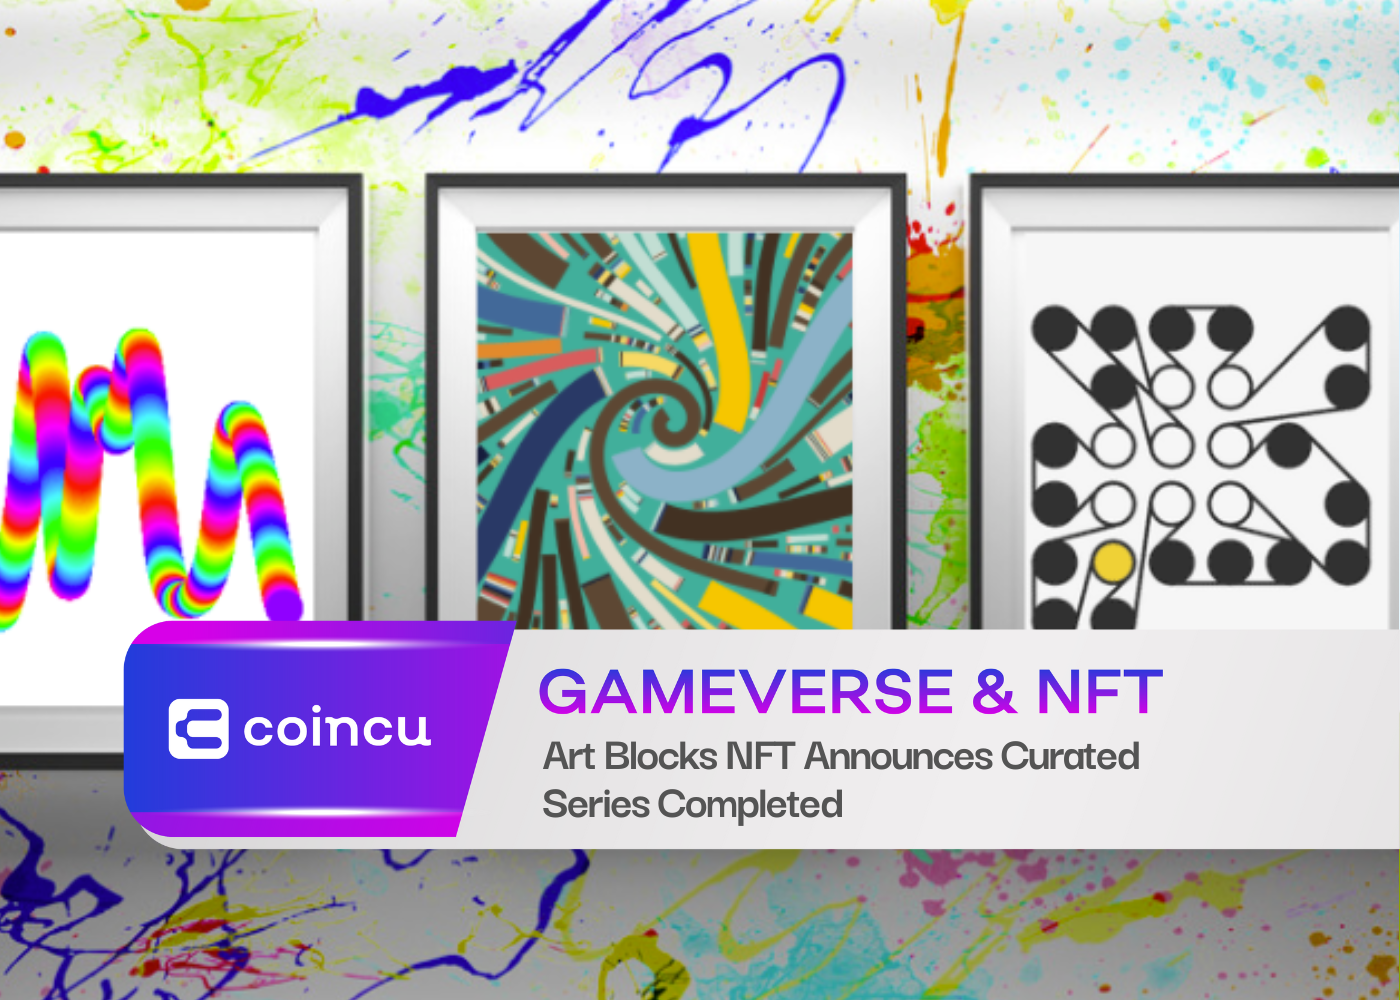 Art Blocks NFT Announces Curated Series Completed